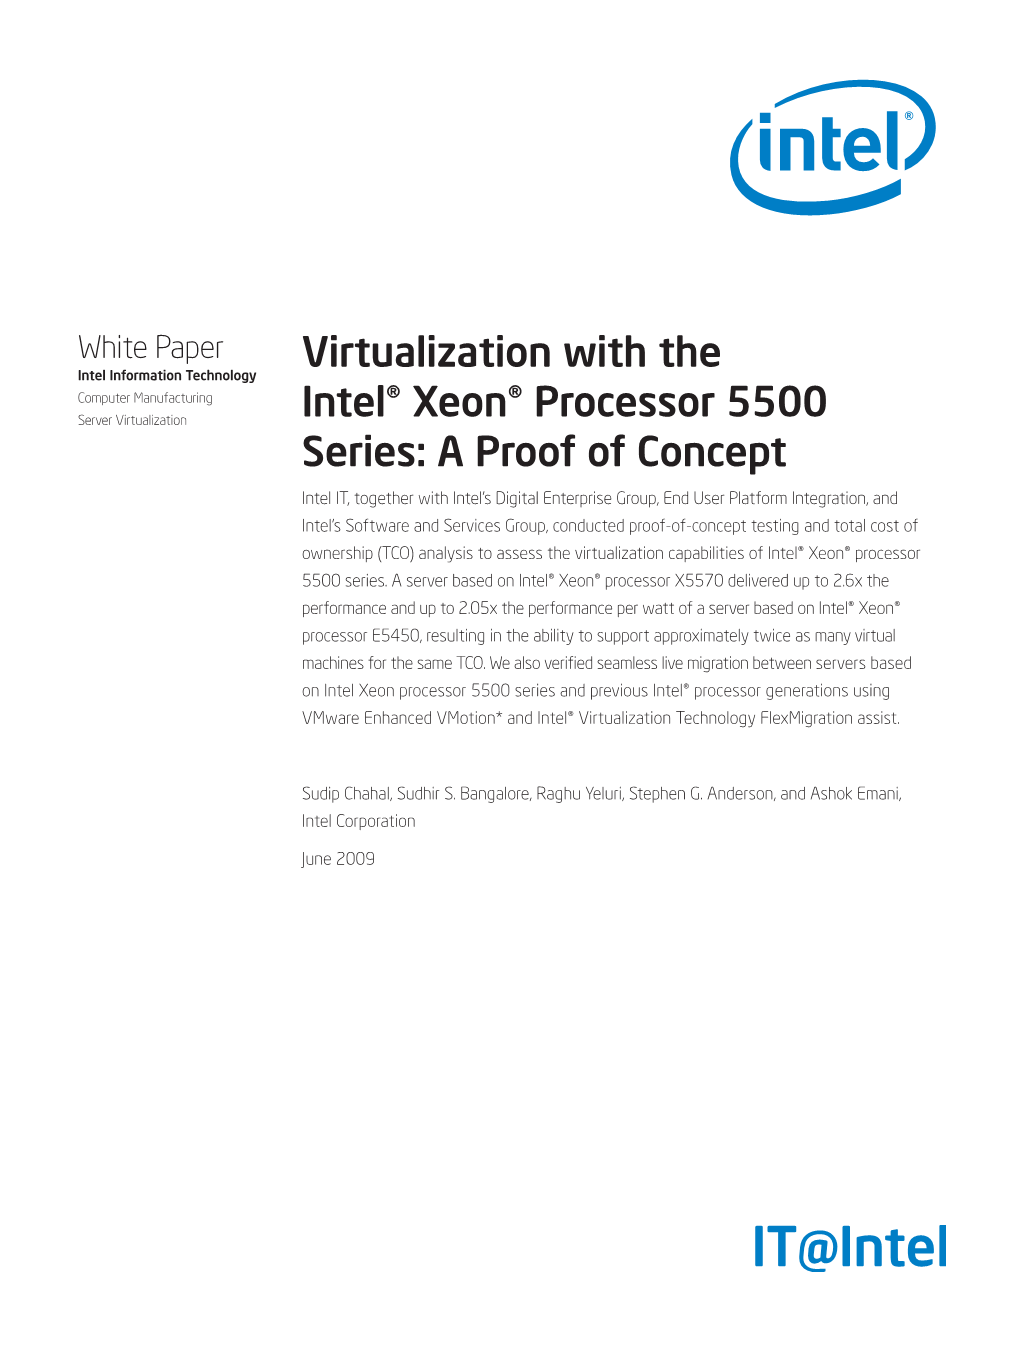 Virtualization with the Intel® Xeon® Processor 5500 Series: a Proof of Concept